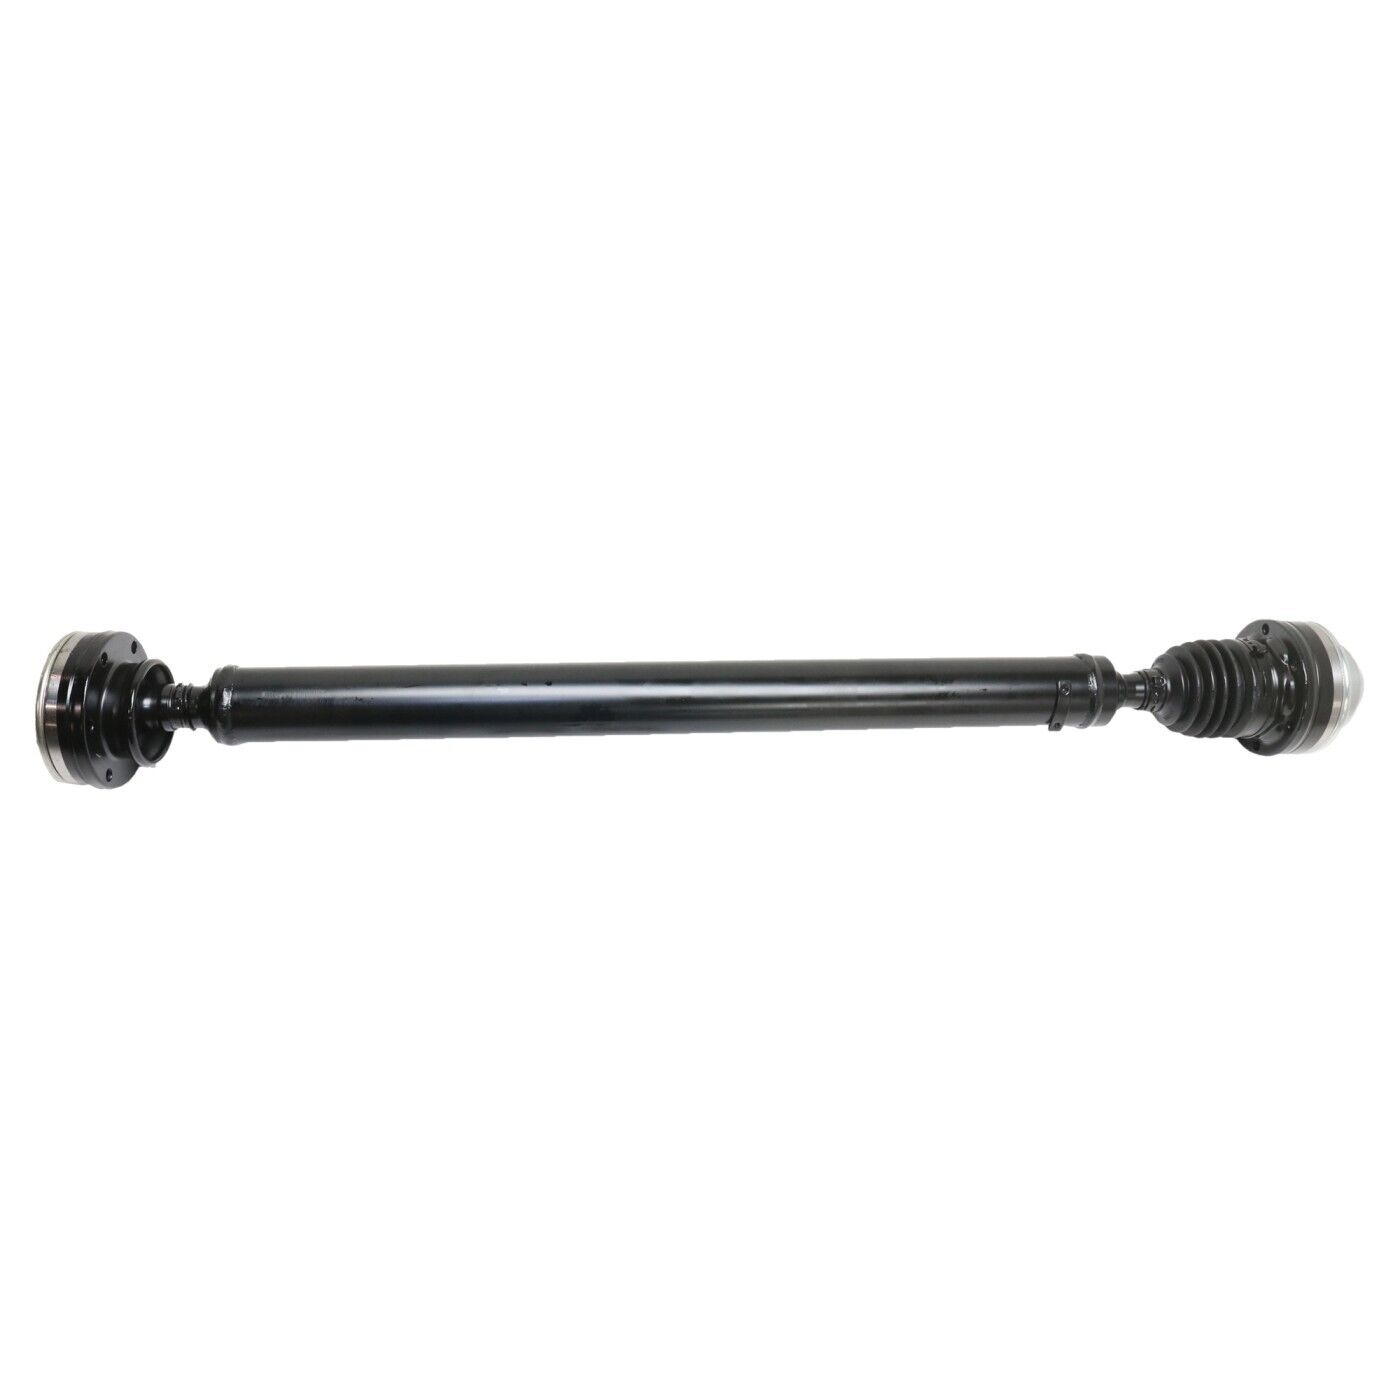 Front Driveshaft For 1999-2000 Jeep Grand Cherokee 4 Wheel Drive 34.6 inch